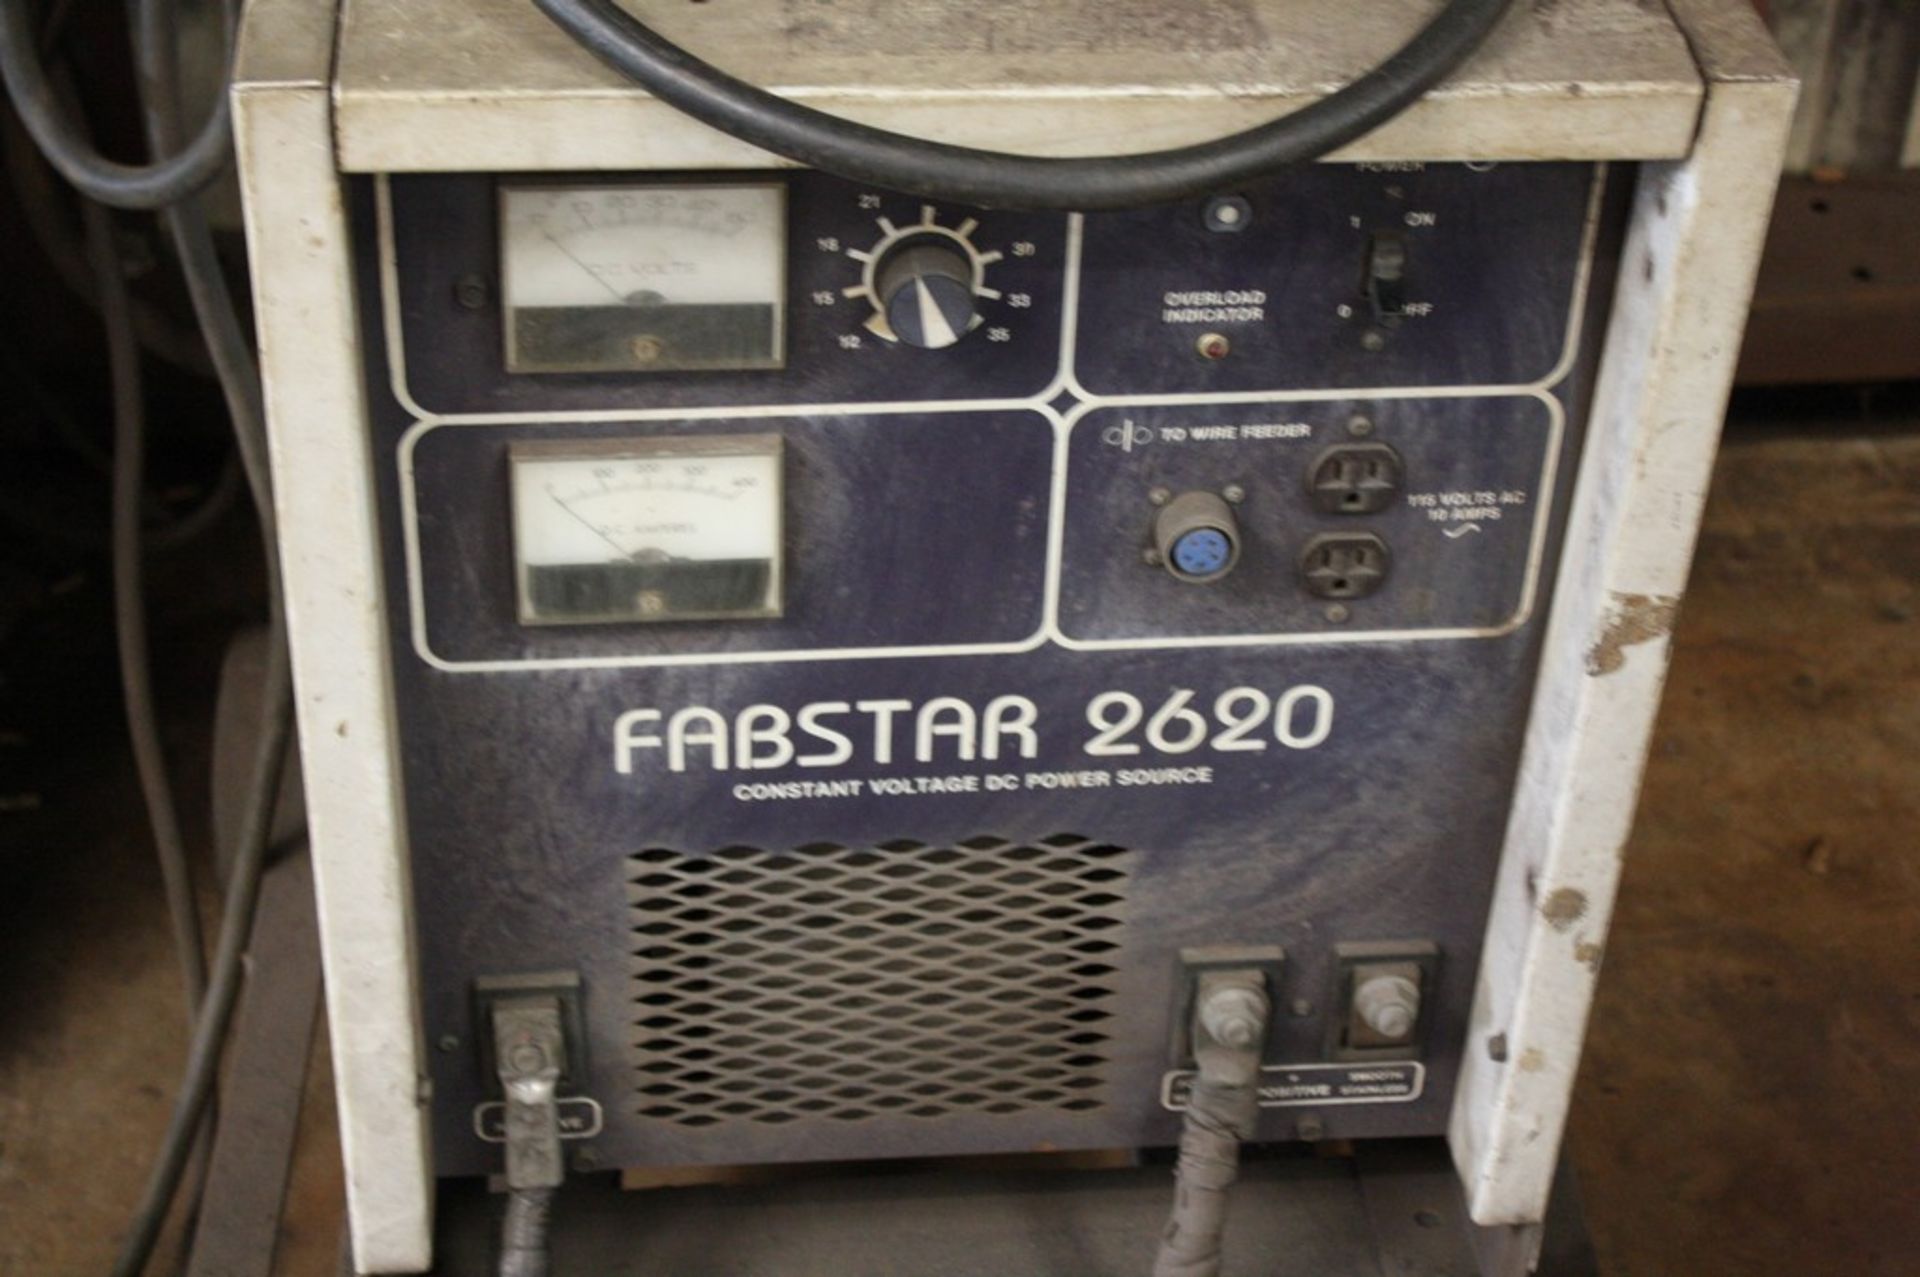 HOBART FABSTAR 2620 Constant Voltage Dc Power Source - Image 2 of 2